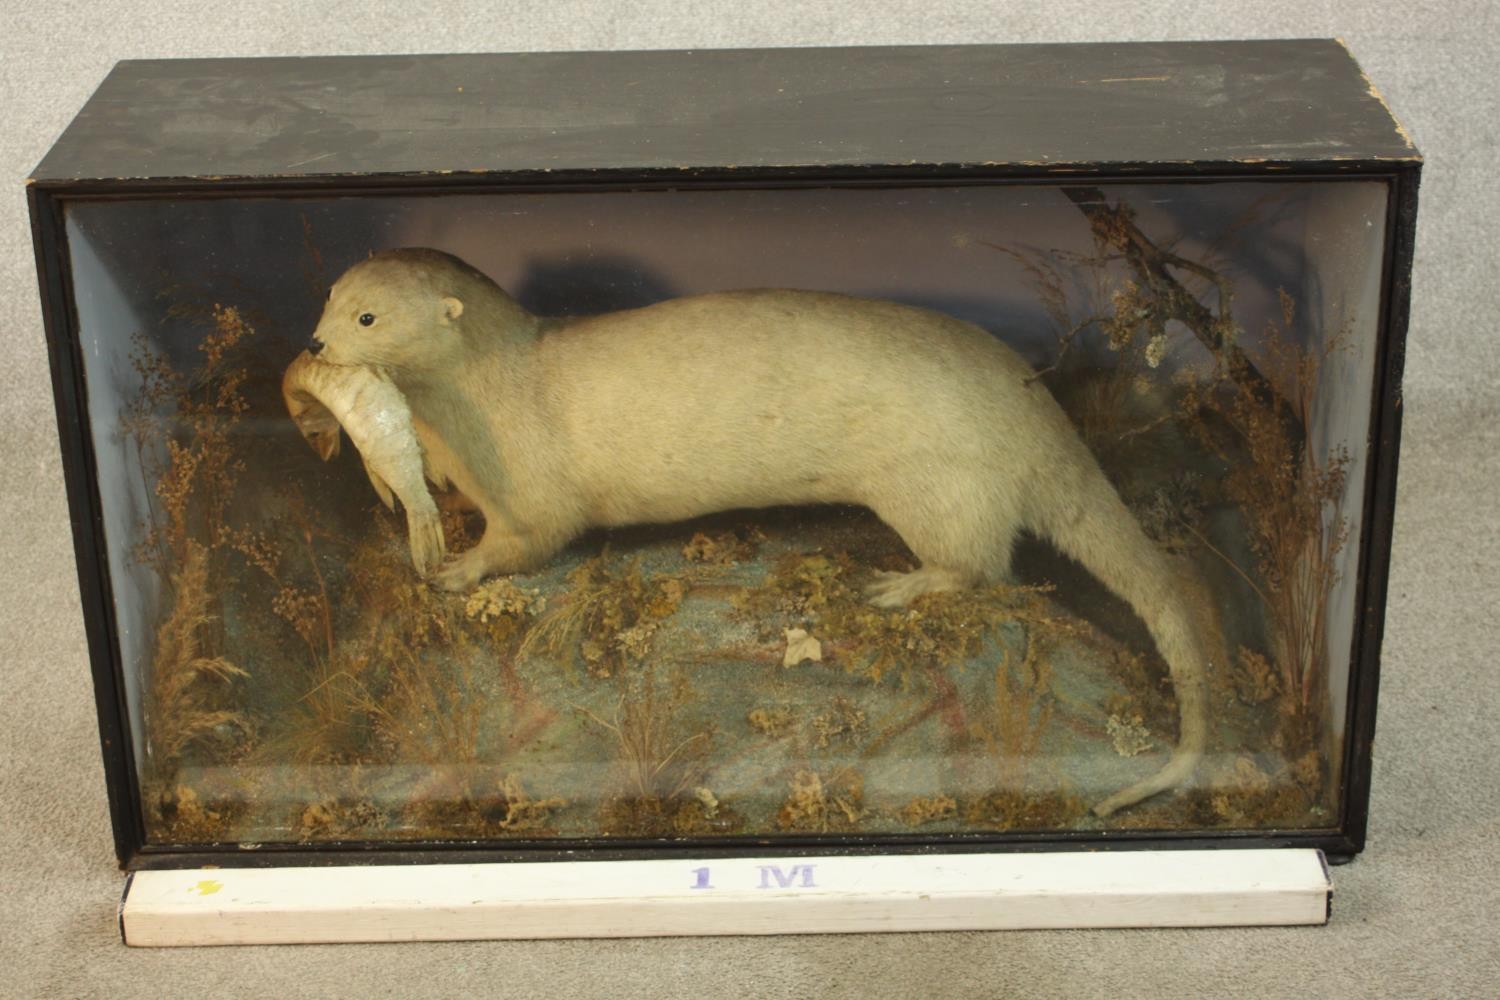 A 19th century cased taxidermy white otter with a fish in its mouth set in a naturalistic setting. - Image 2 of 6